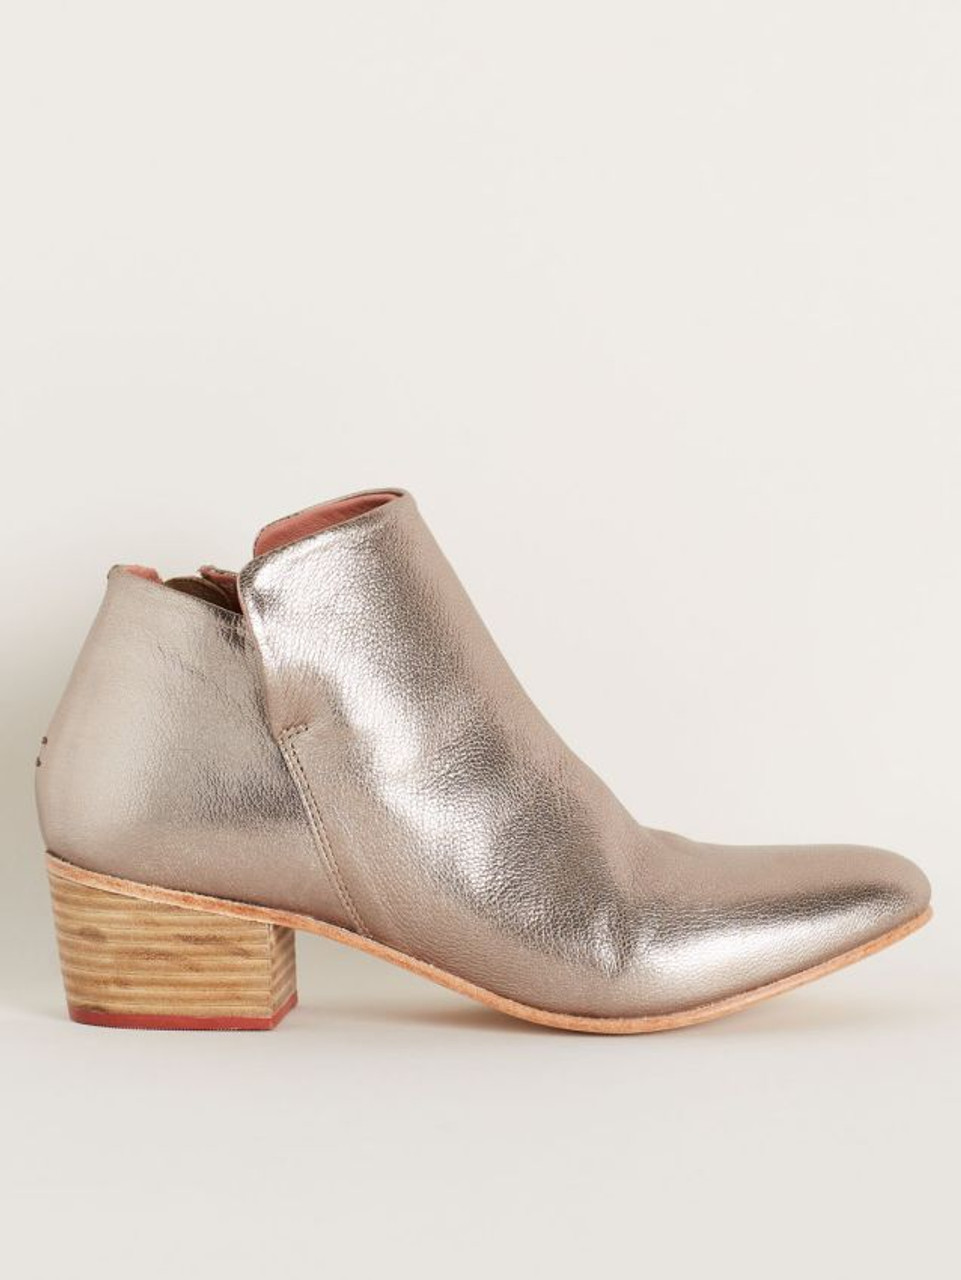 Nancybird Gold Boot | Women’s Leather Boots | Pure Magik stockists